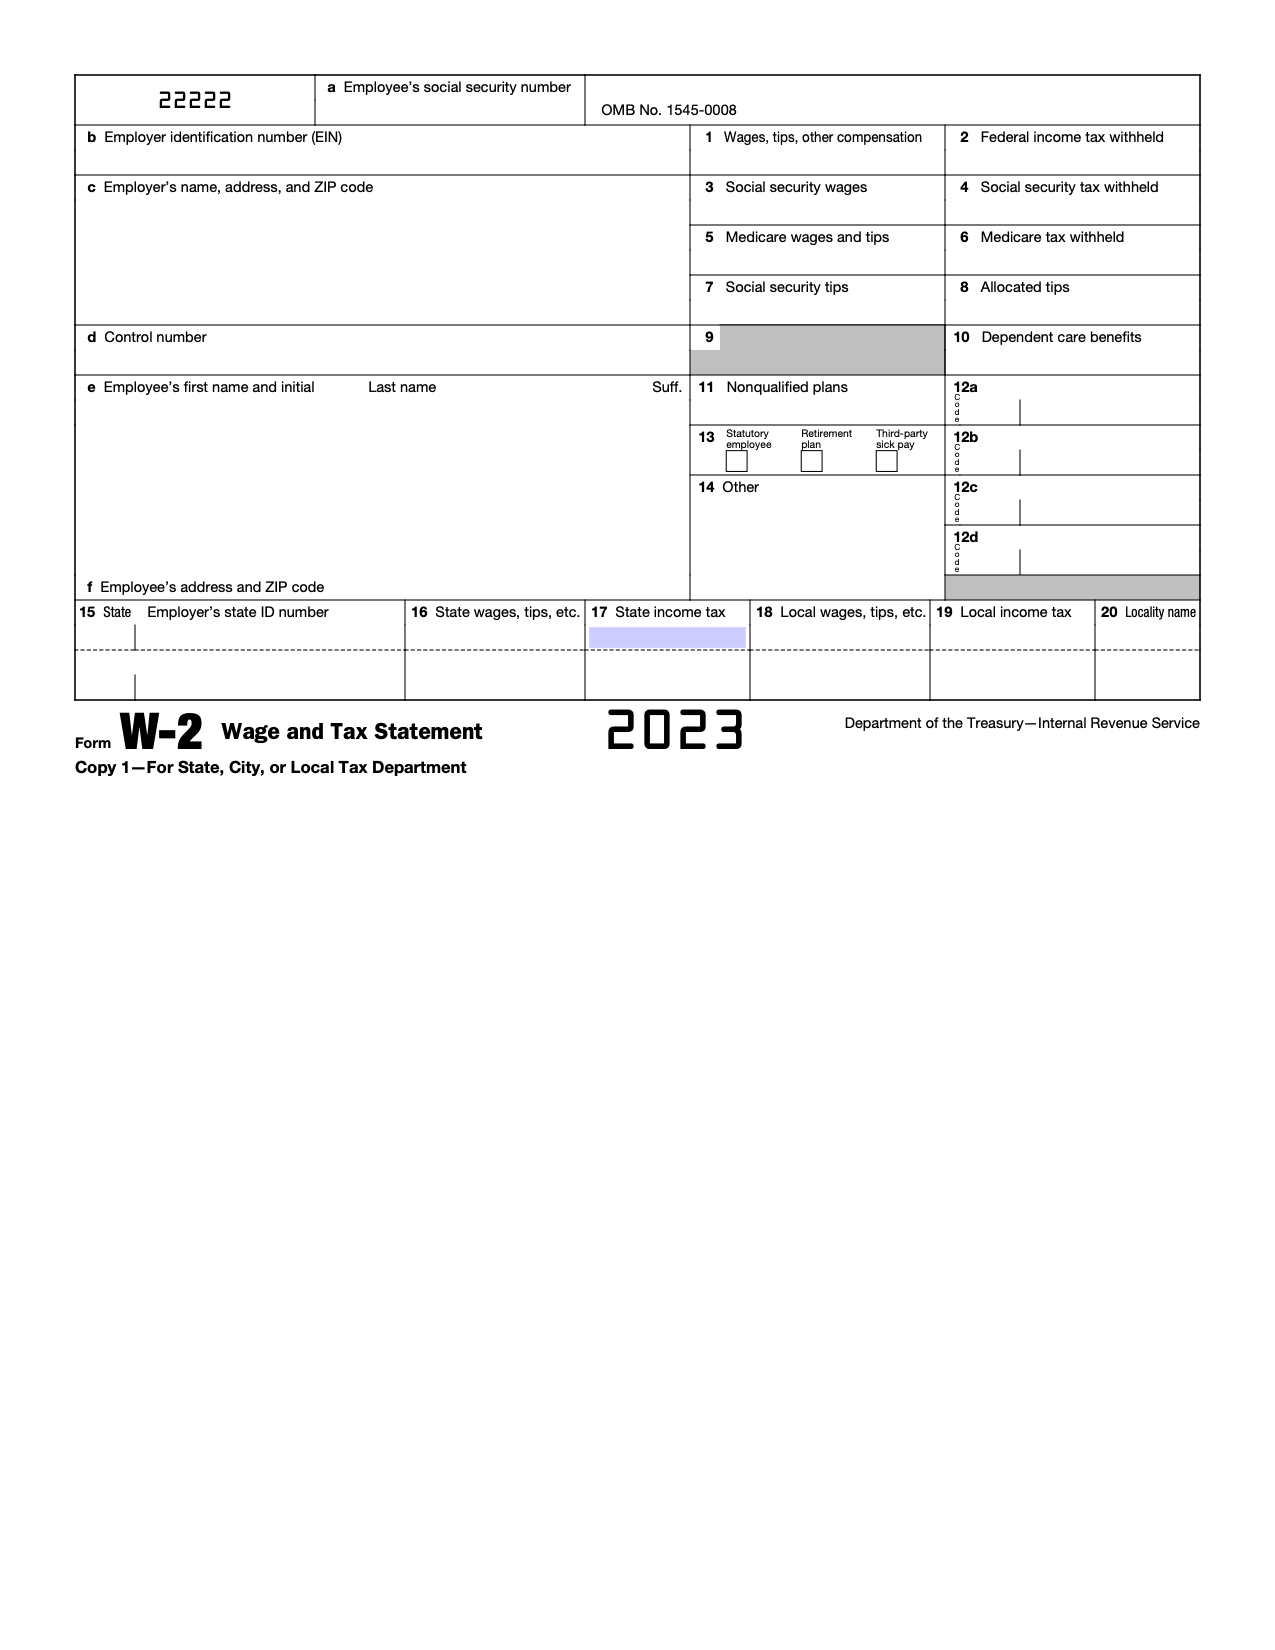 Free Irs Form W-2 | Wage And Tax Statement - Pdf – Eforms throughout Blank W2 Form To Print